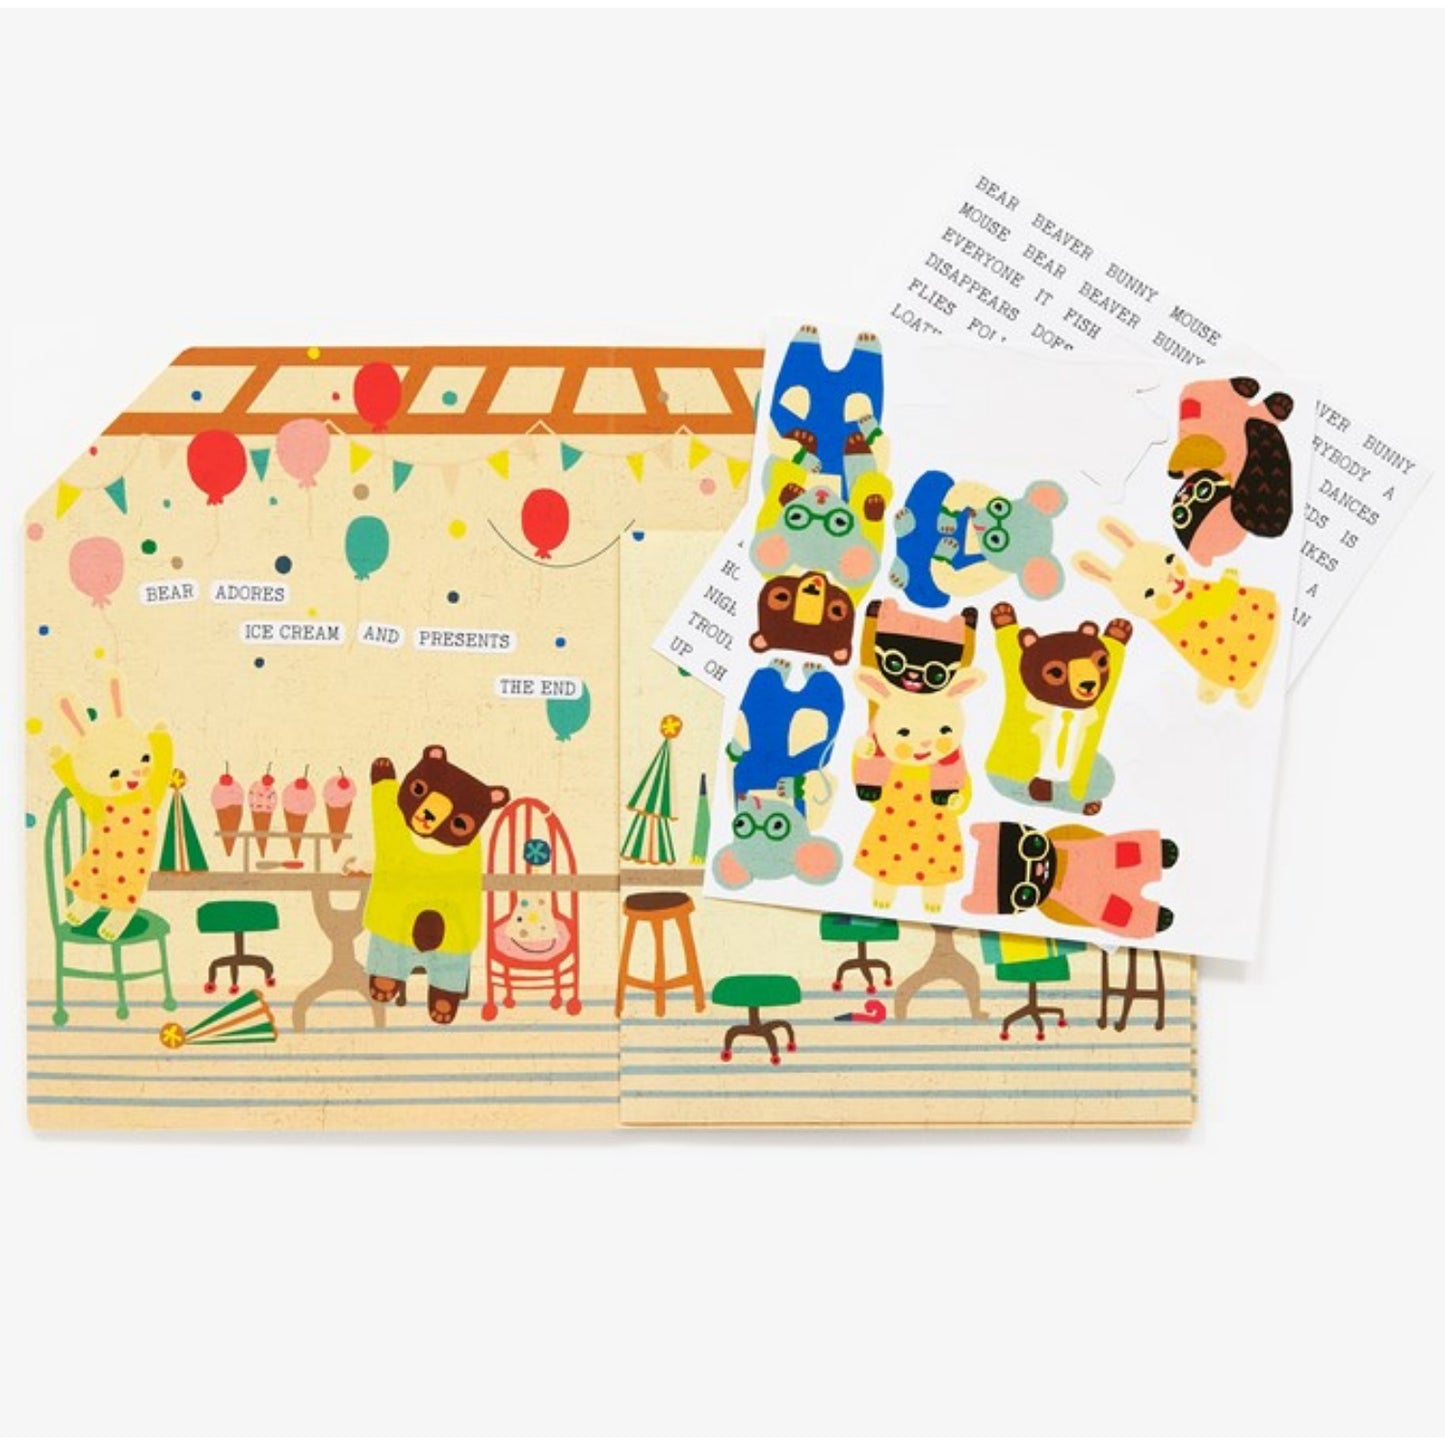 Story House | Interactive Children's Board Book for Storytelling